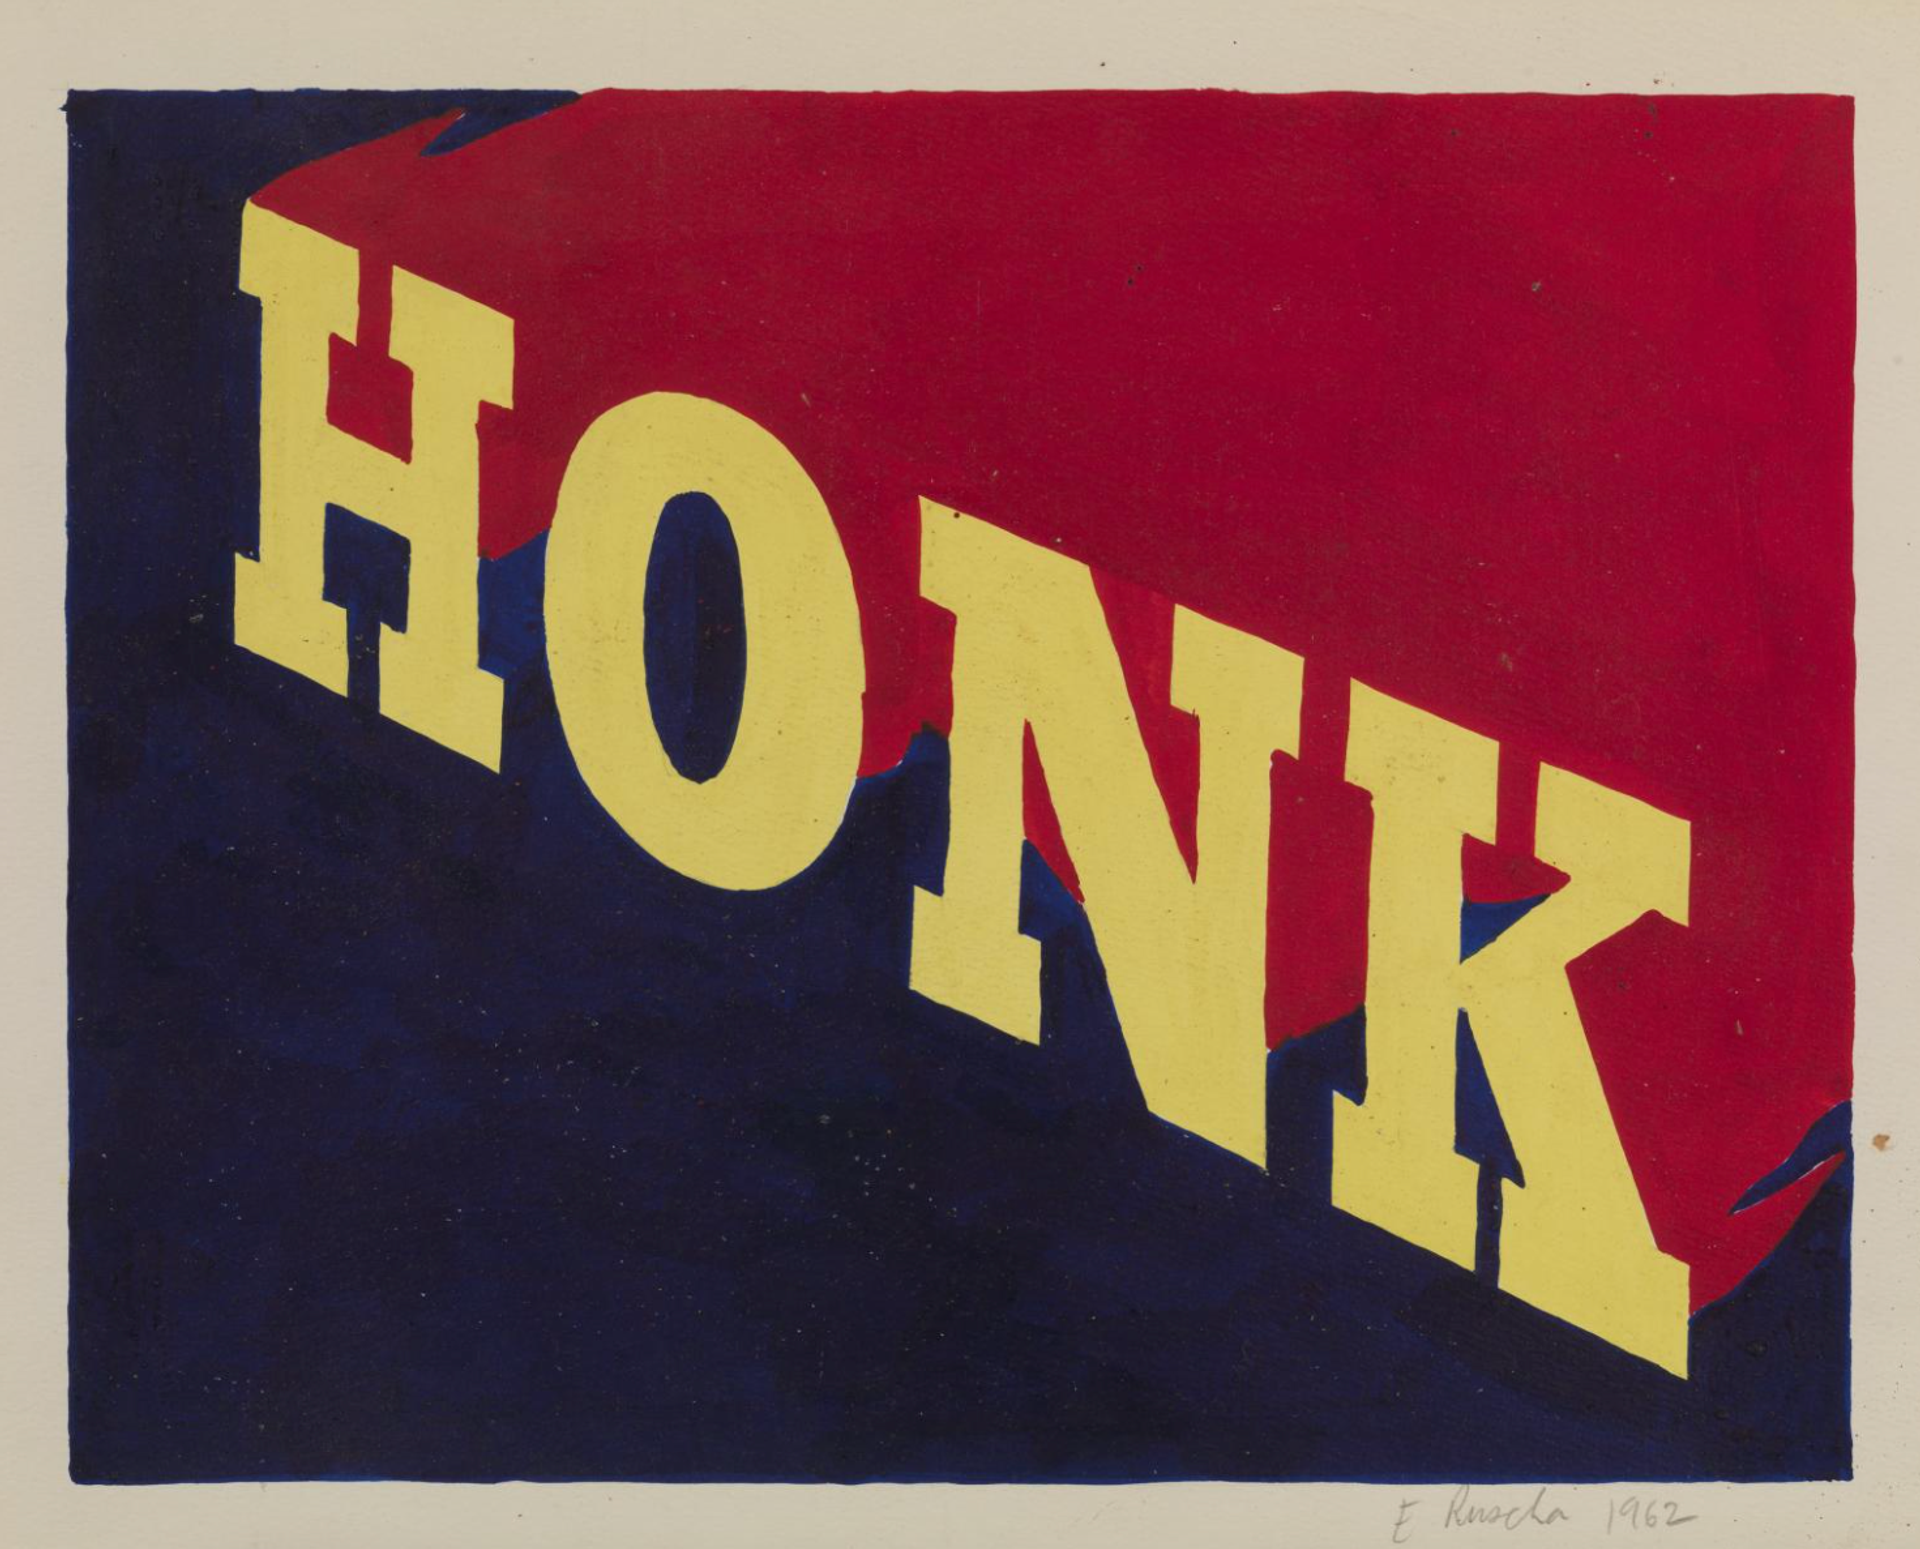 Painting by Ed Ruscha depicting the word 'HONK', in capitalised, diagonally inclined serif typography. The letters are painted in bright yellow and are set against a deep blue background. The letters are trailing an area of deep red that is perpendicular to the yellow lettering, giving a suggestion of depth within the picture plane.